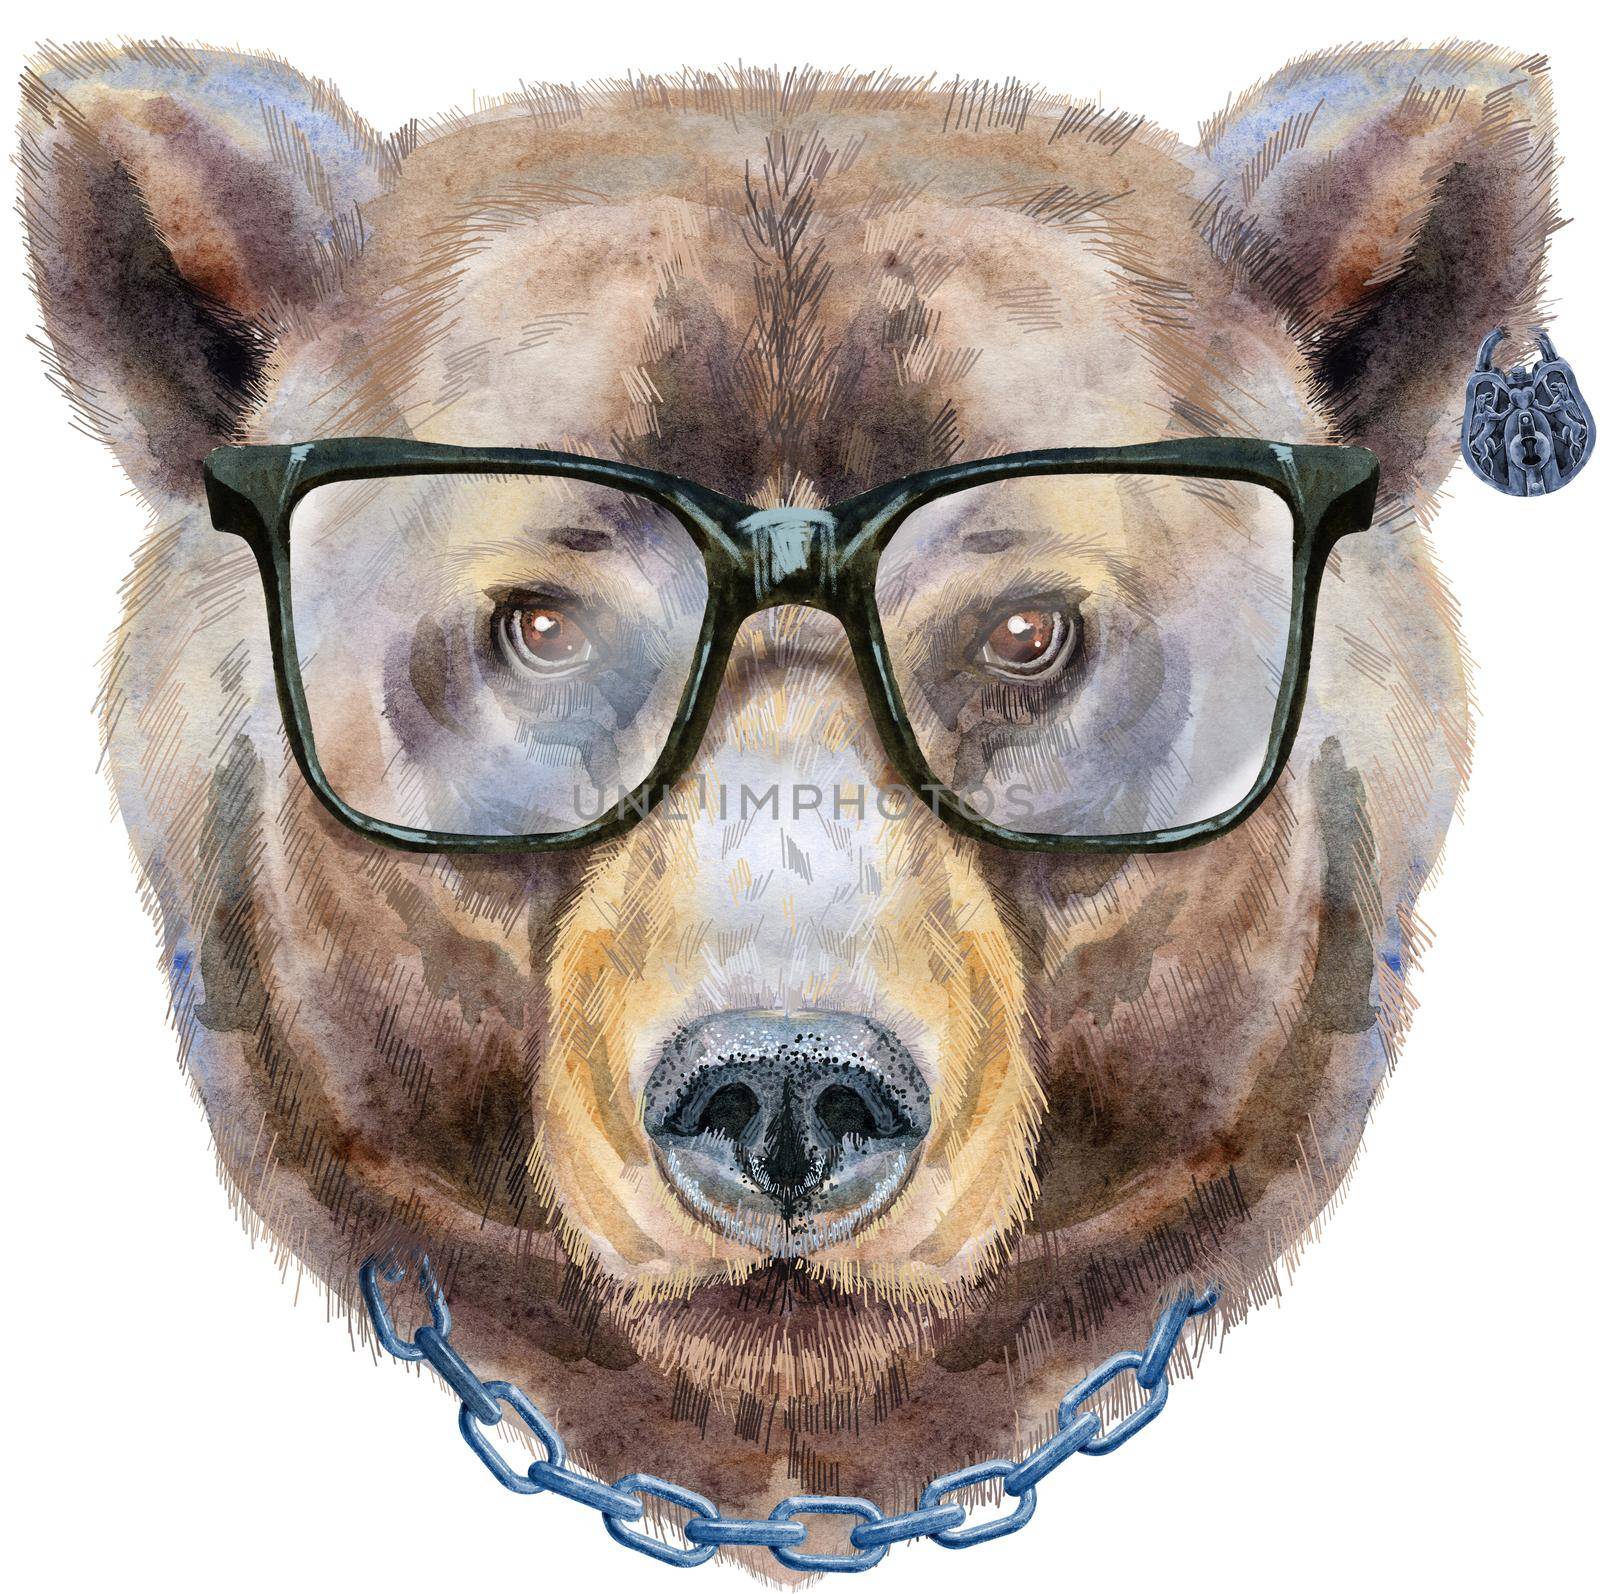 Bear portrait with glasses. Watercolor brown bear painting illustration. Beautiful wildlife world